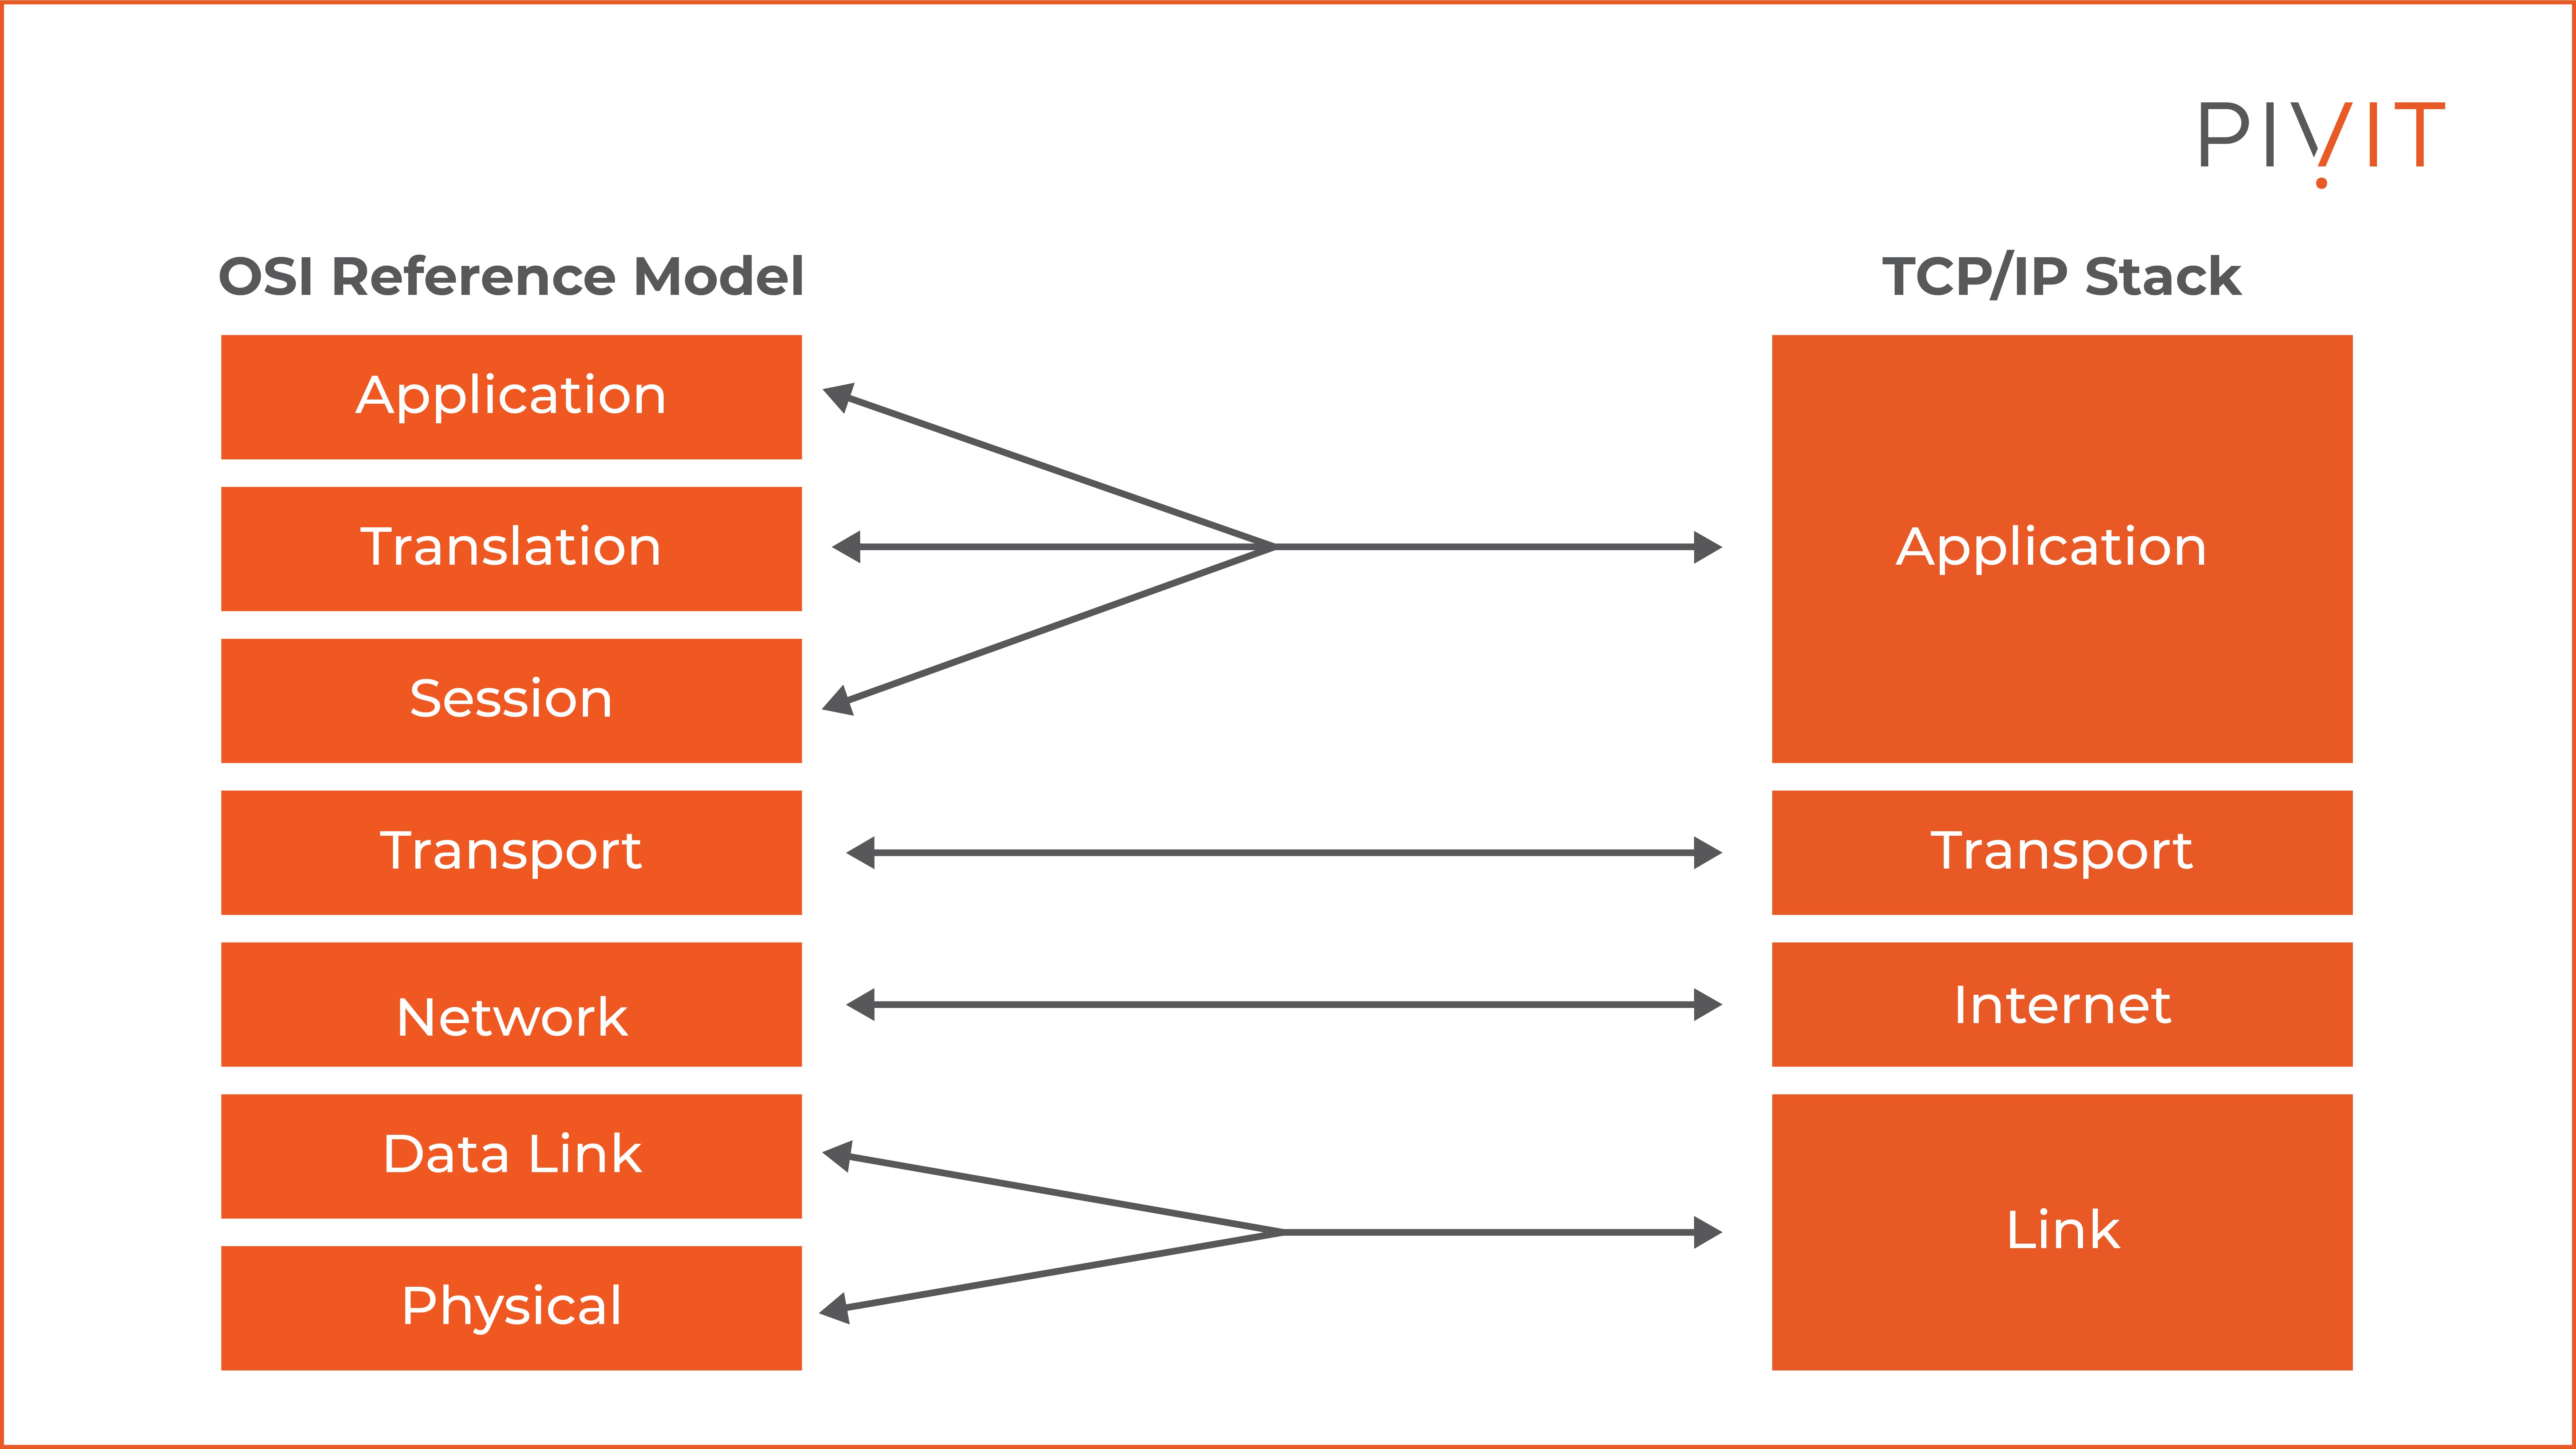 Comparison between the order of the layers in the TCP/IP stack and the OSI reference model